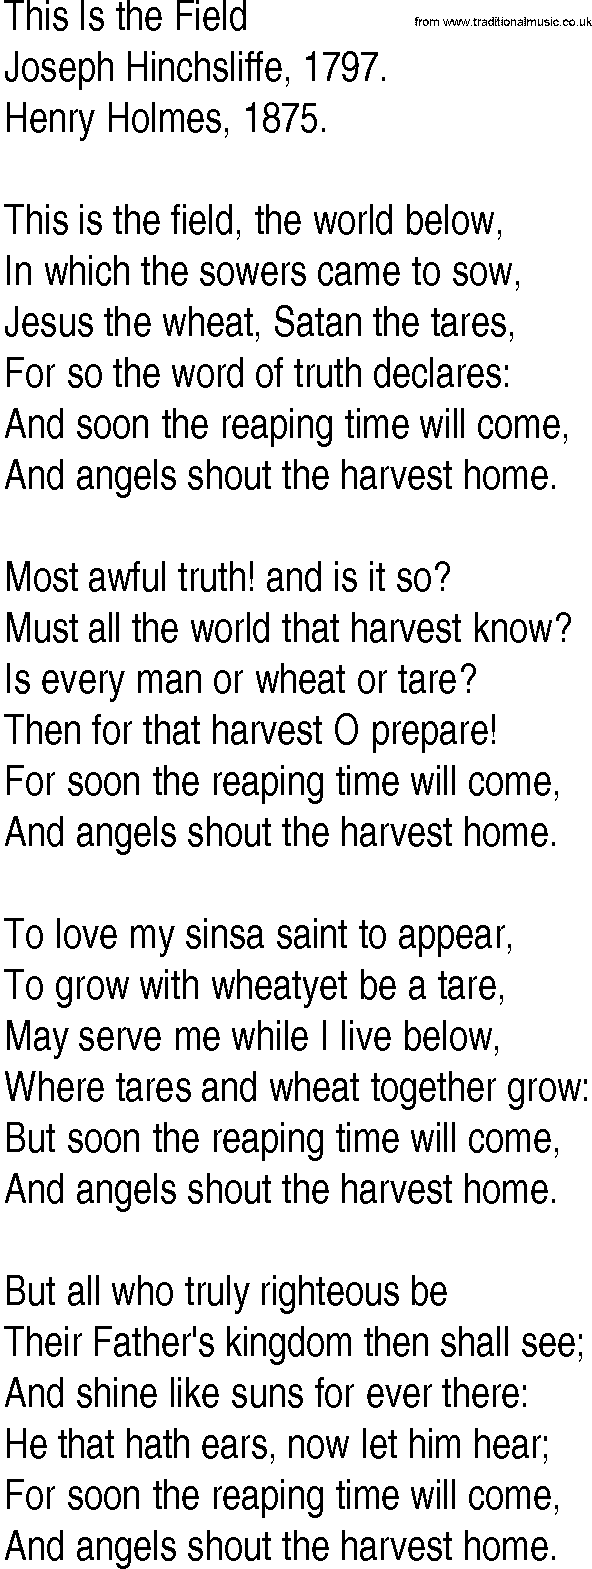 Hymn and Gospel Song: This Is the Field by Joseph Hinchsliffe lyrics